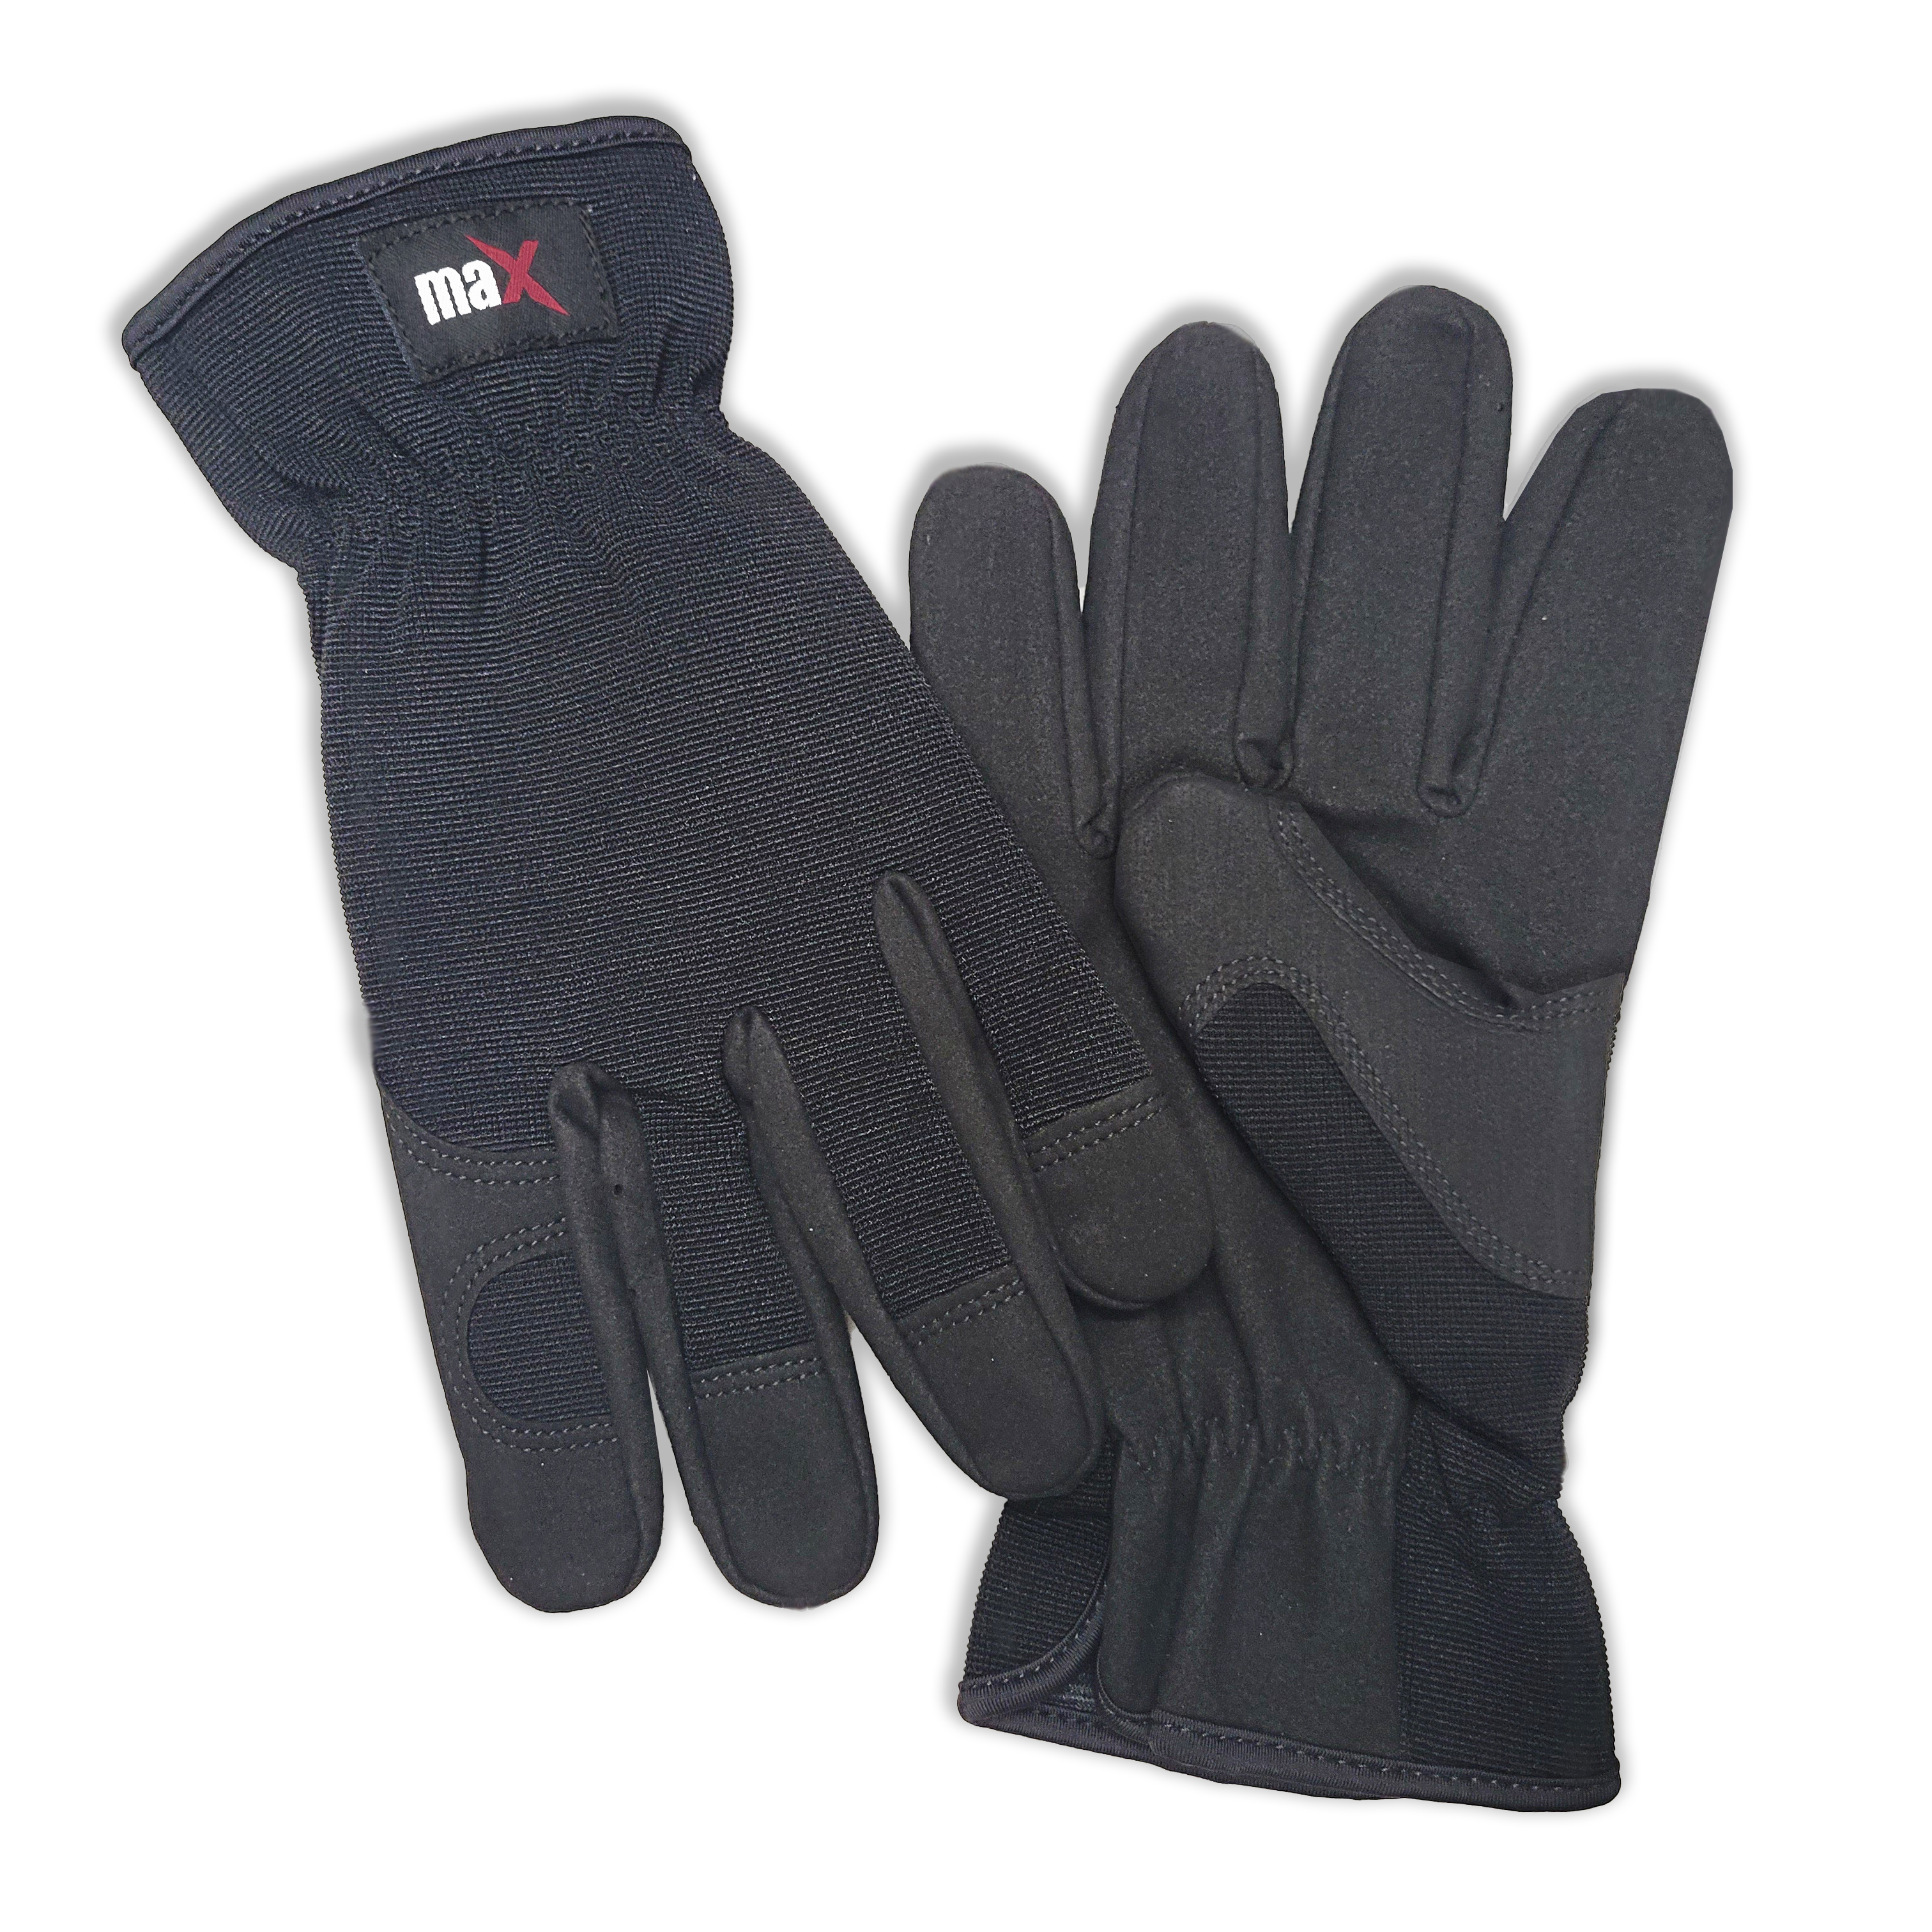 maX&trade; 1.0 Sport Utility Gloves